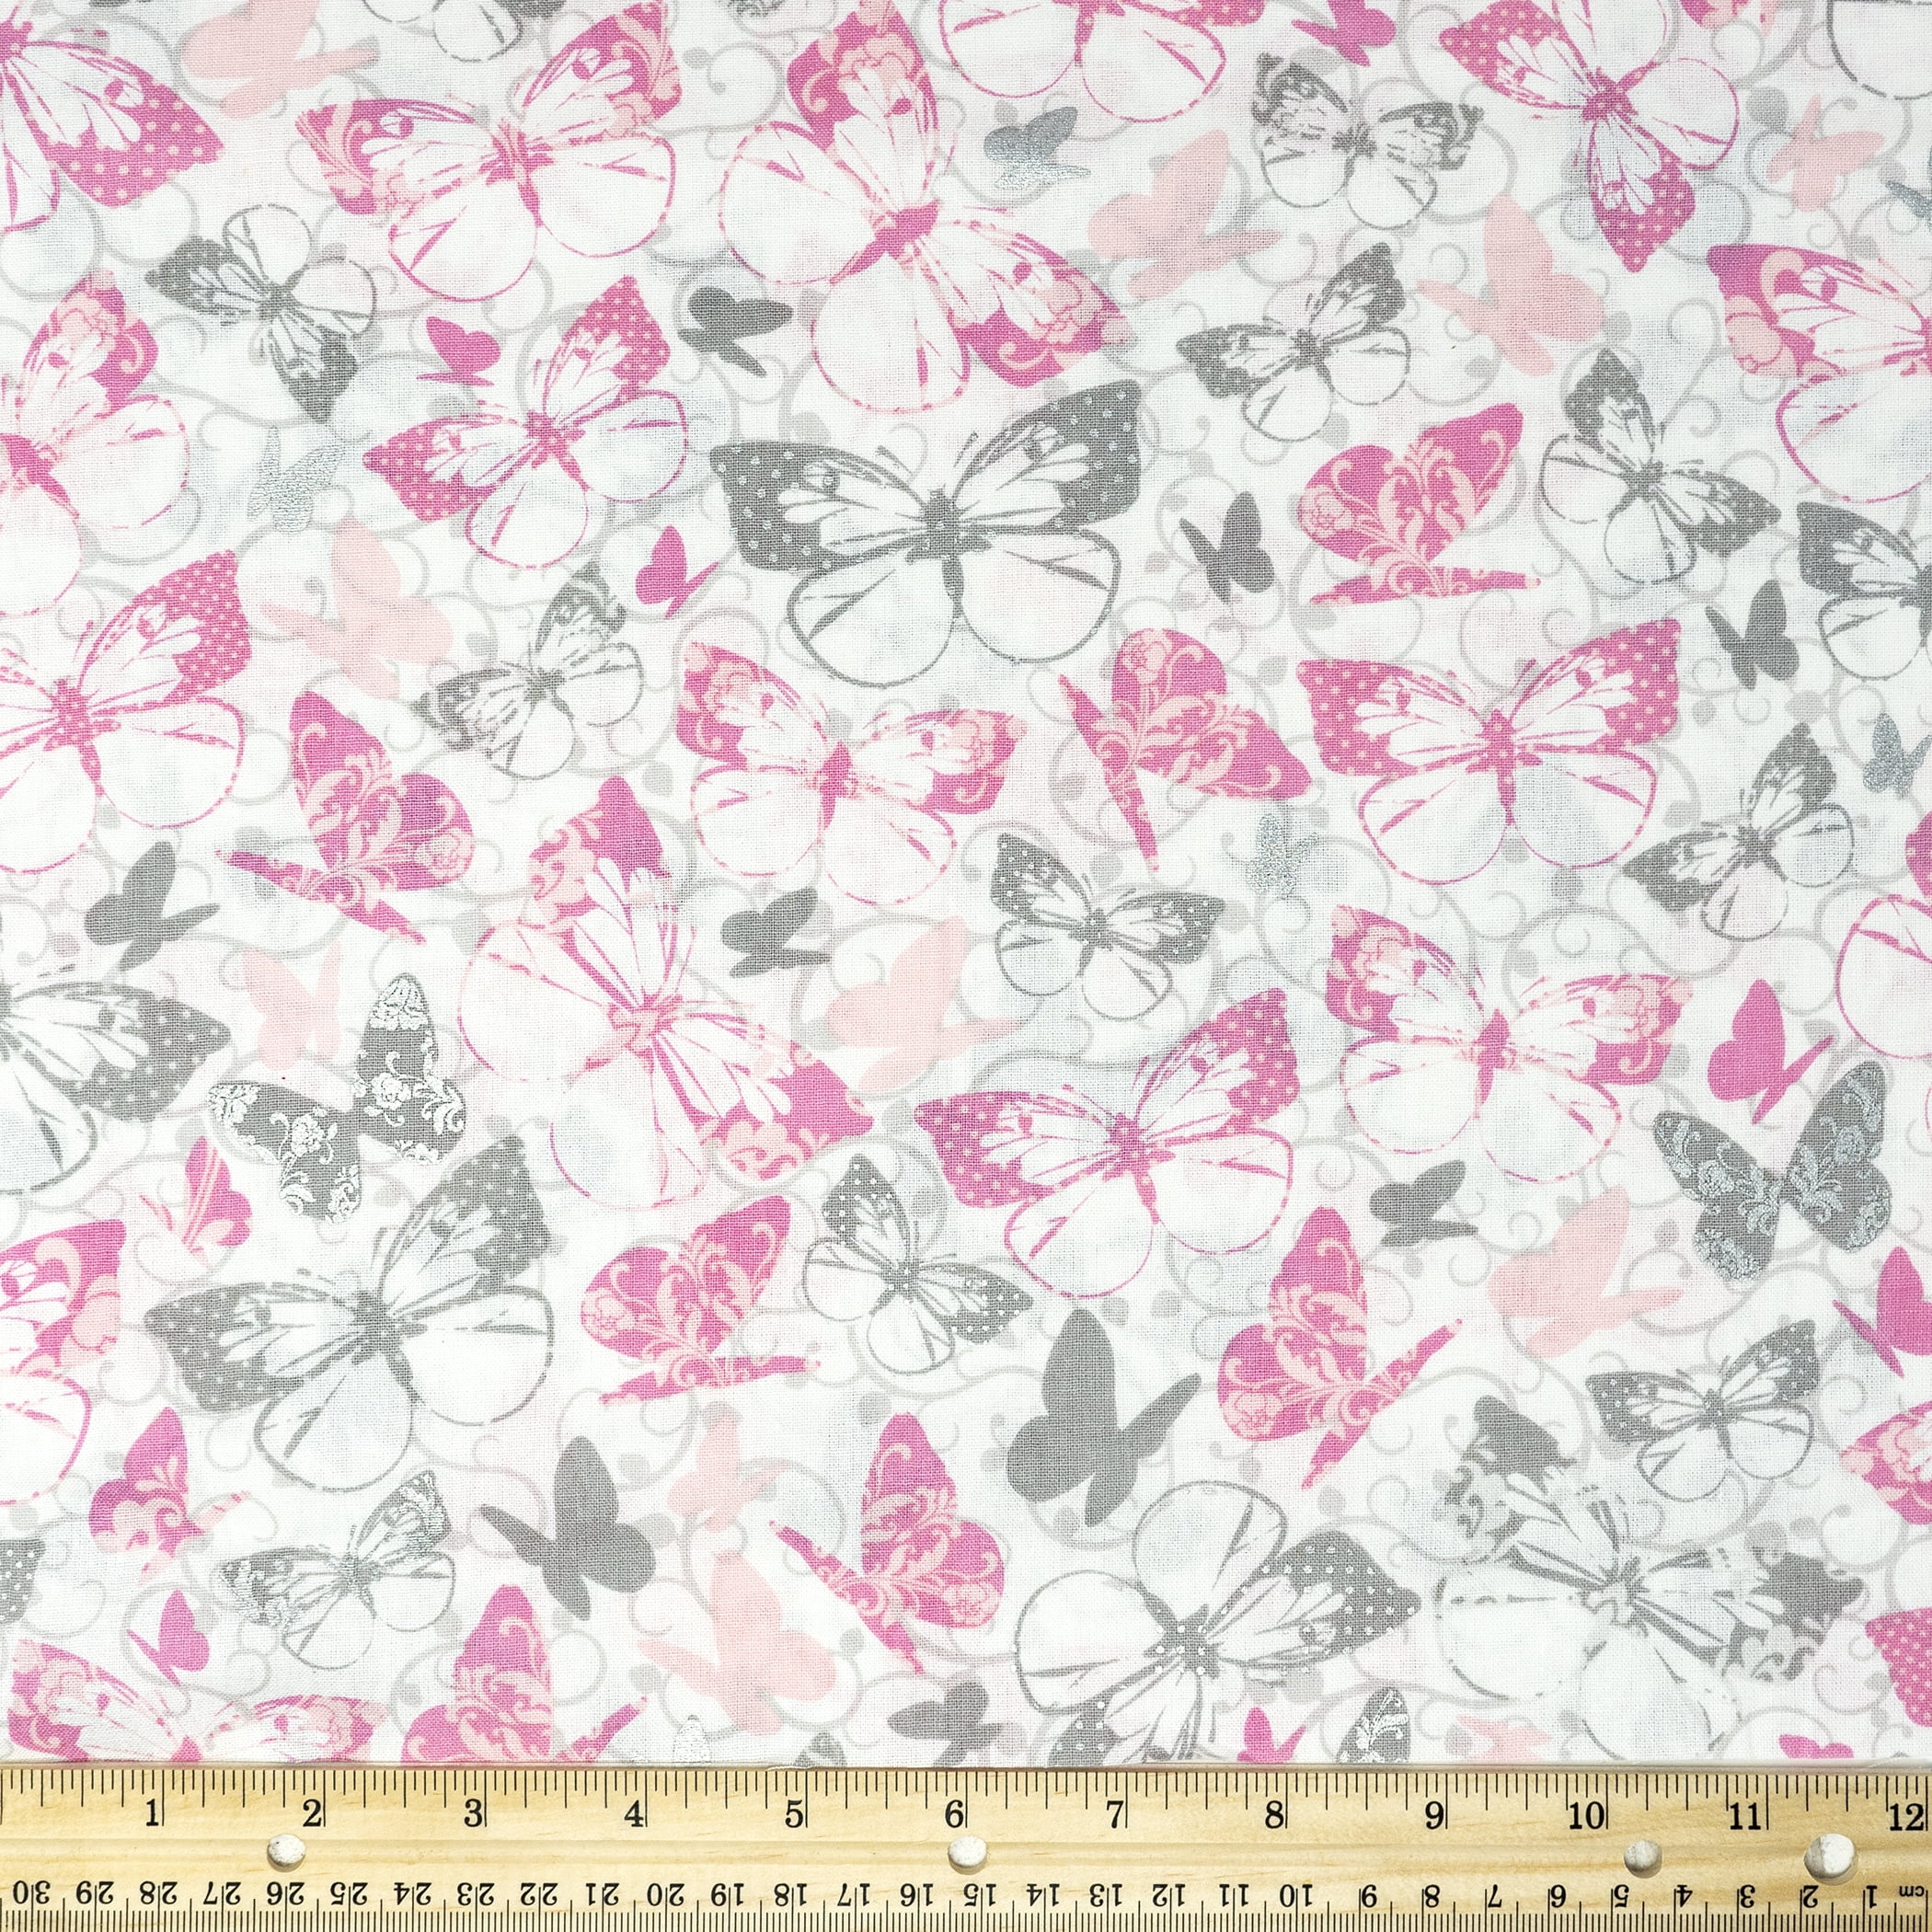 100% Cotton FAST shipping Packed Floral with Butterflies on Navy Background Fabric sold by the YARD